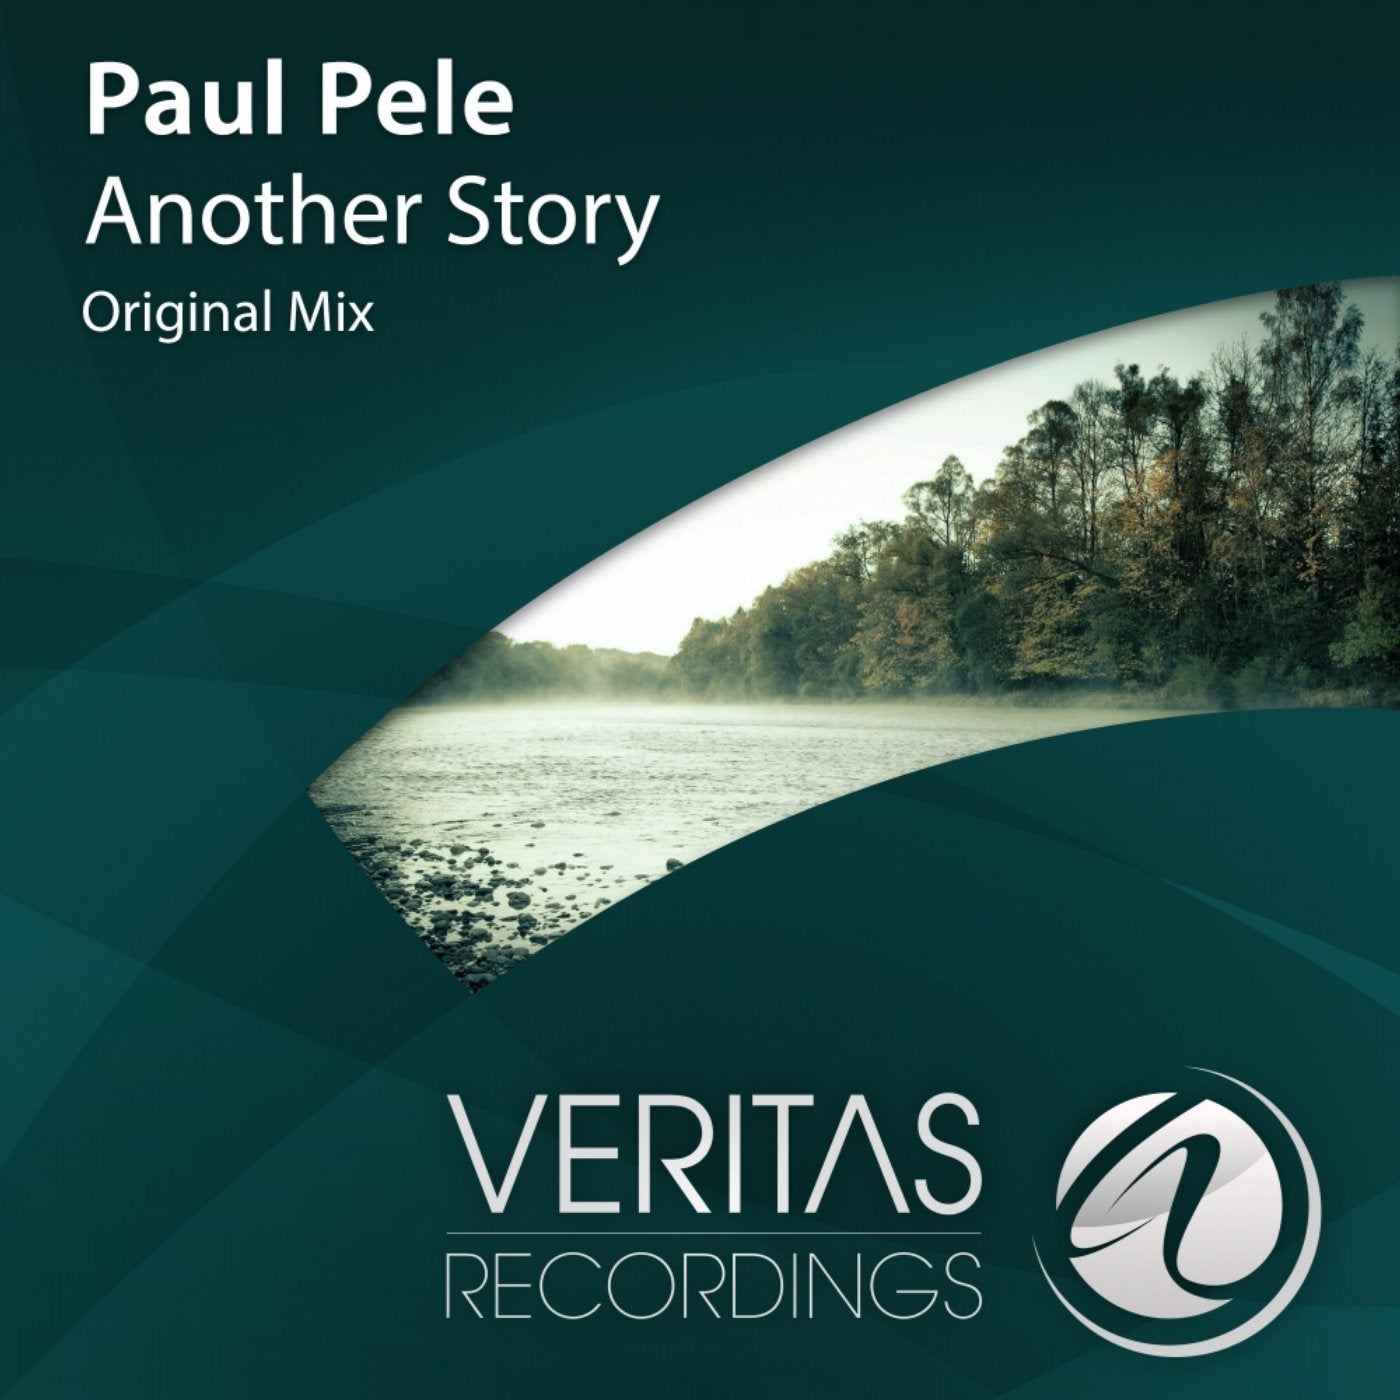 Paul records. Paul pele. Another story.